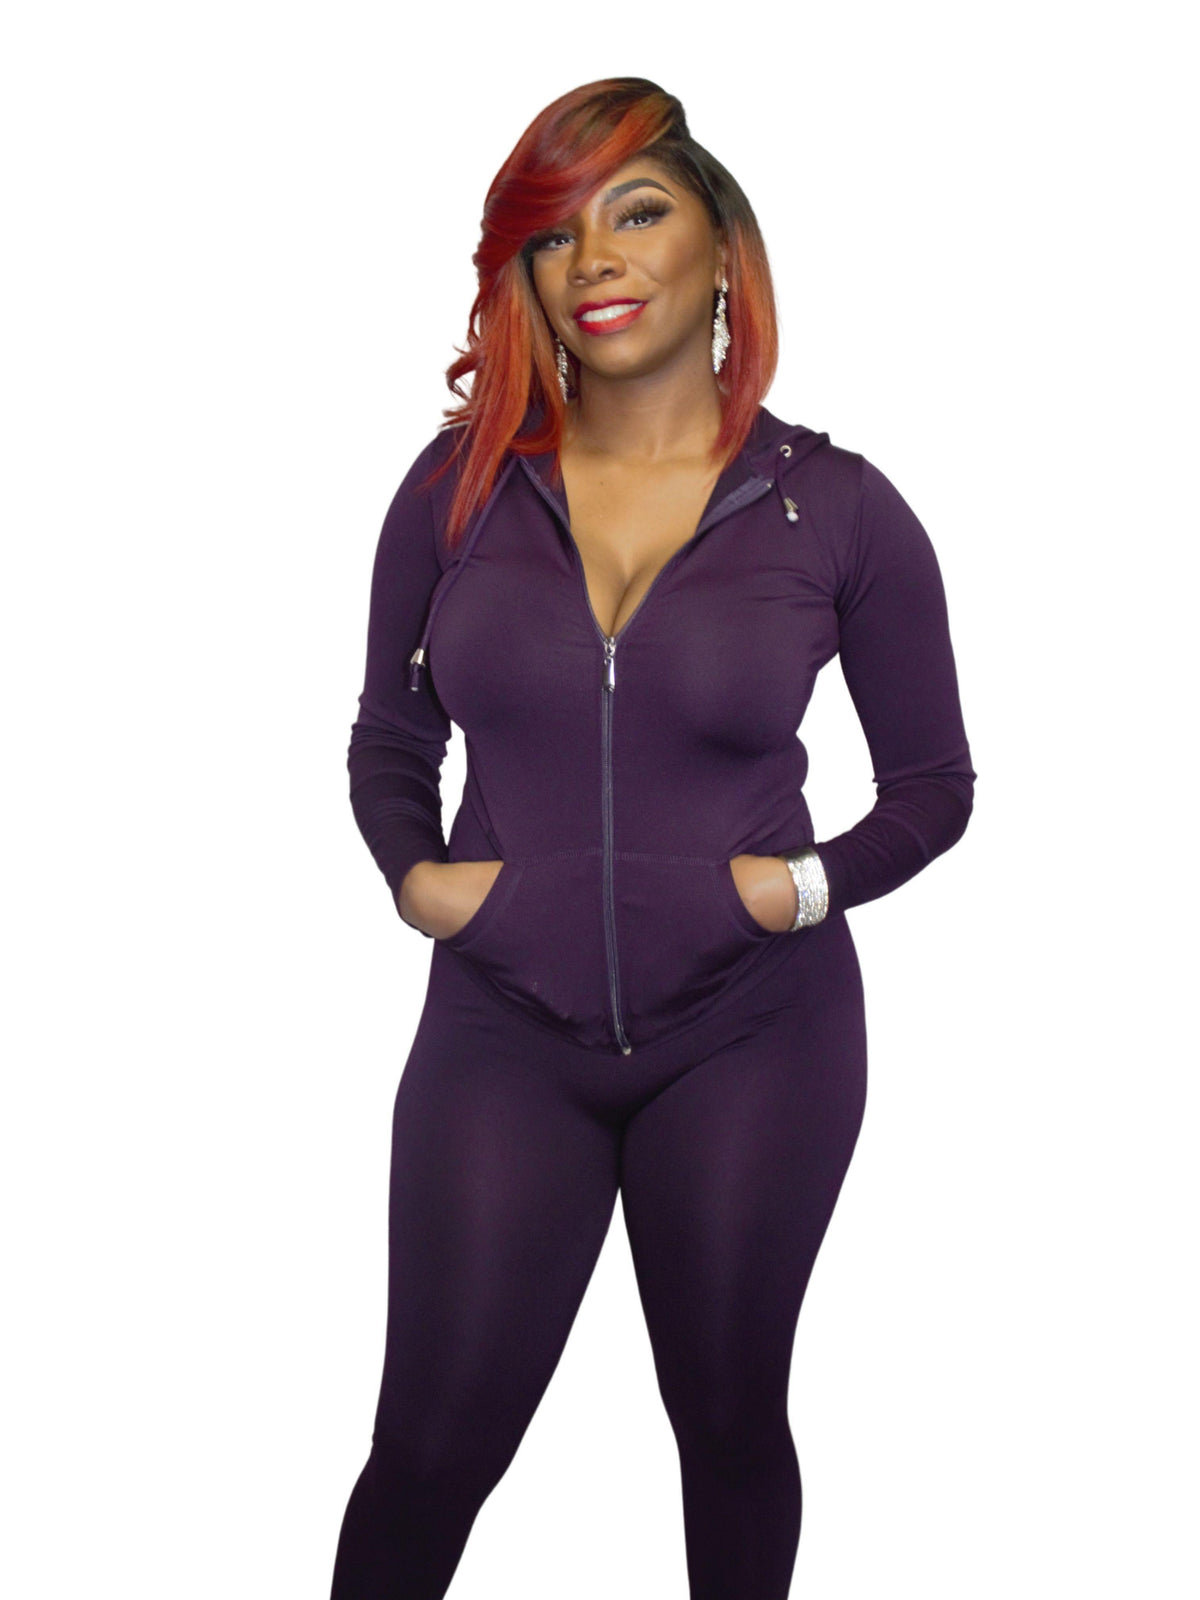 Two piece purple hoodie and matching leggings